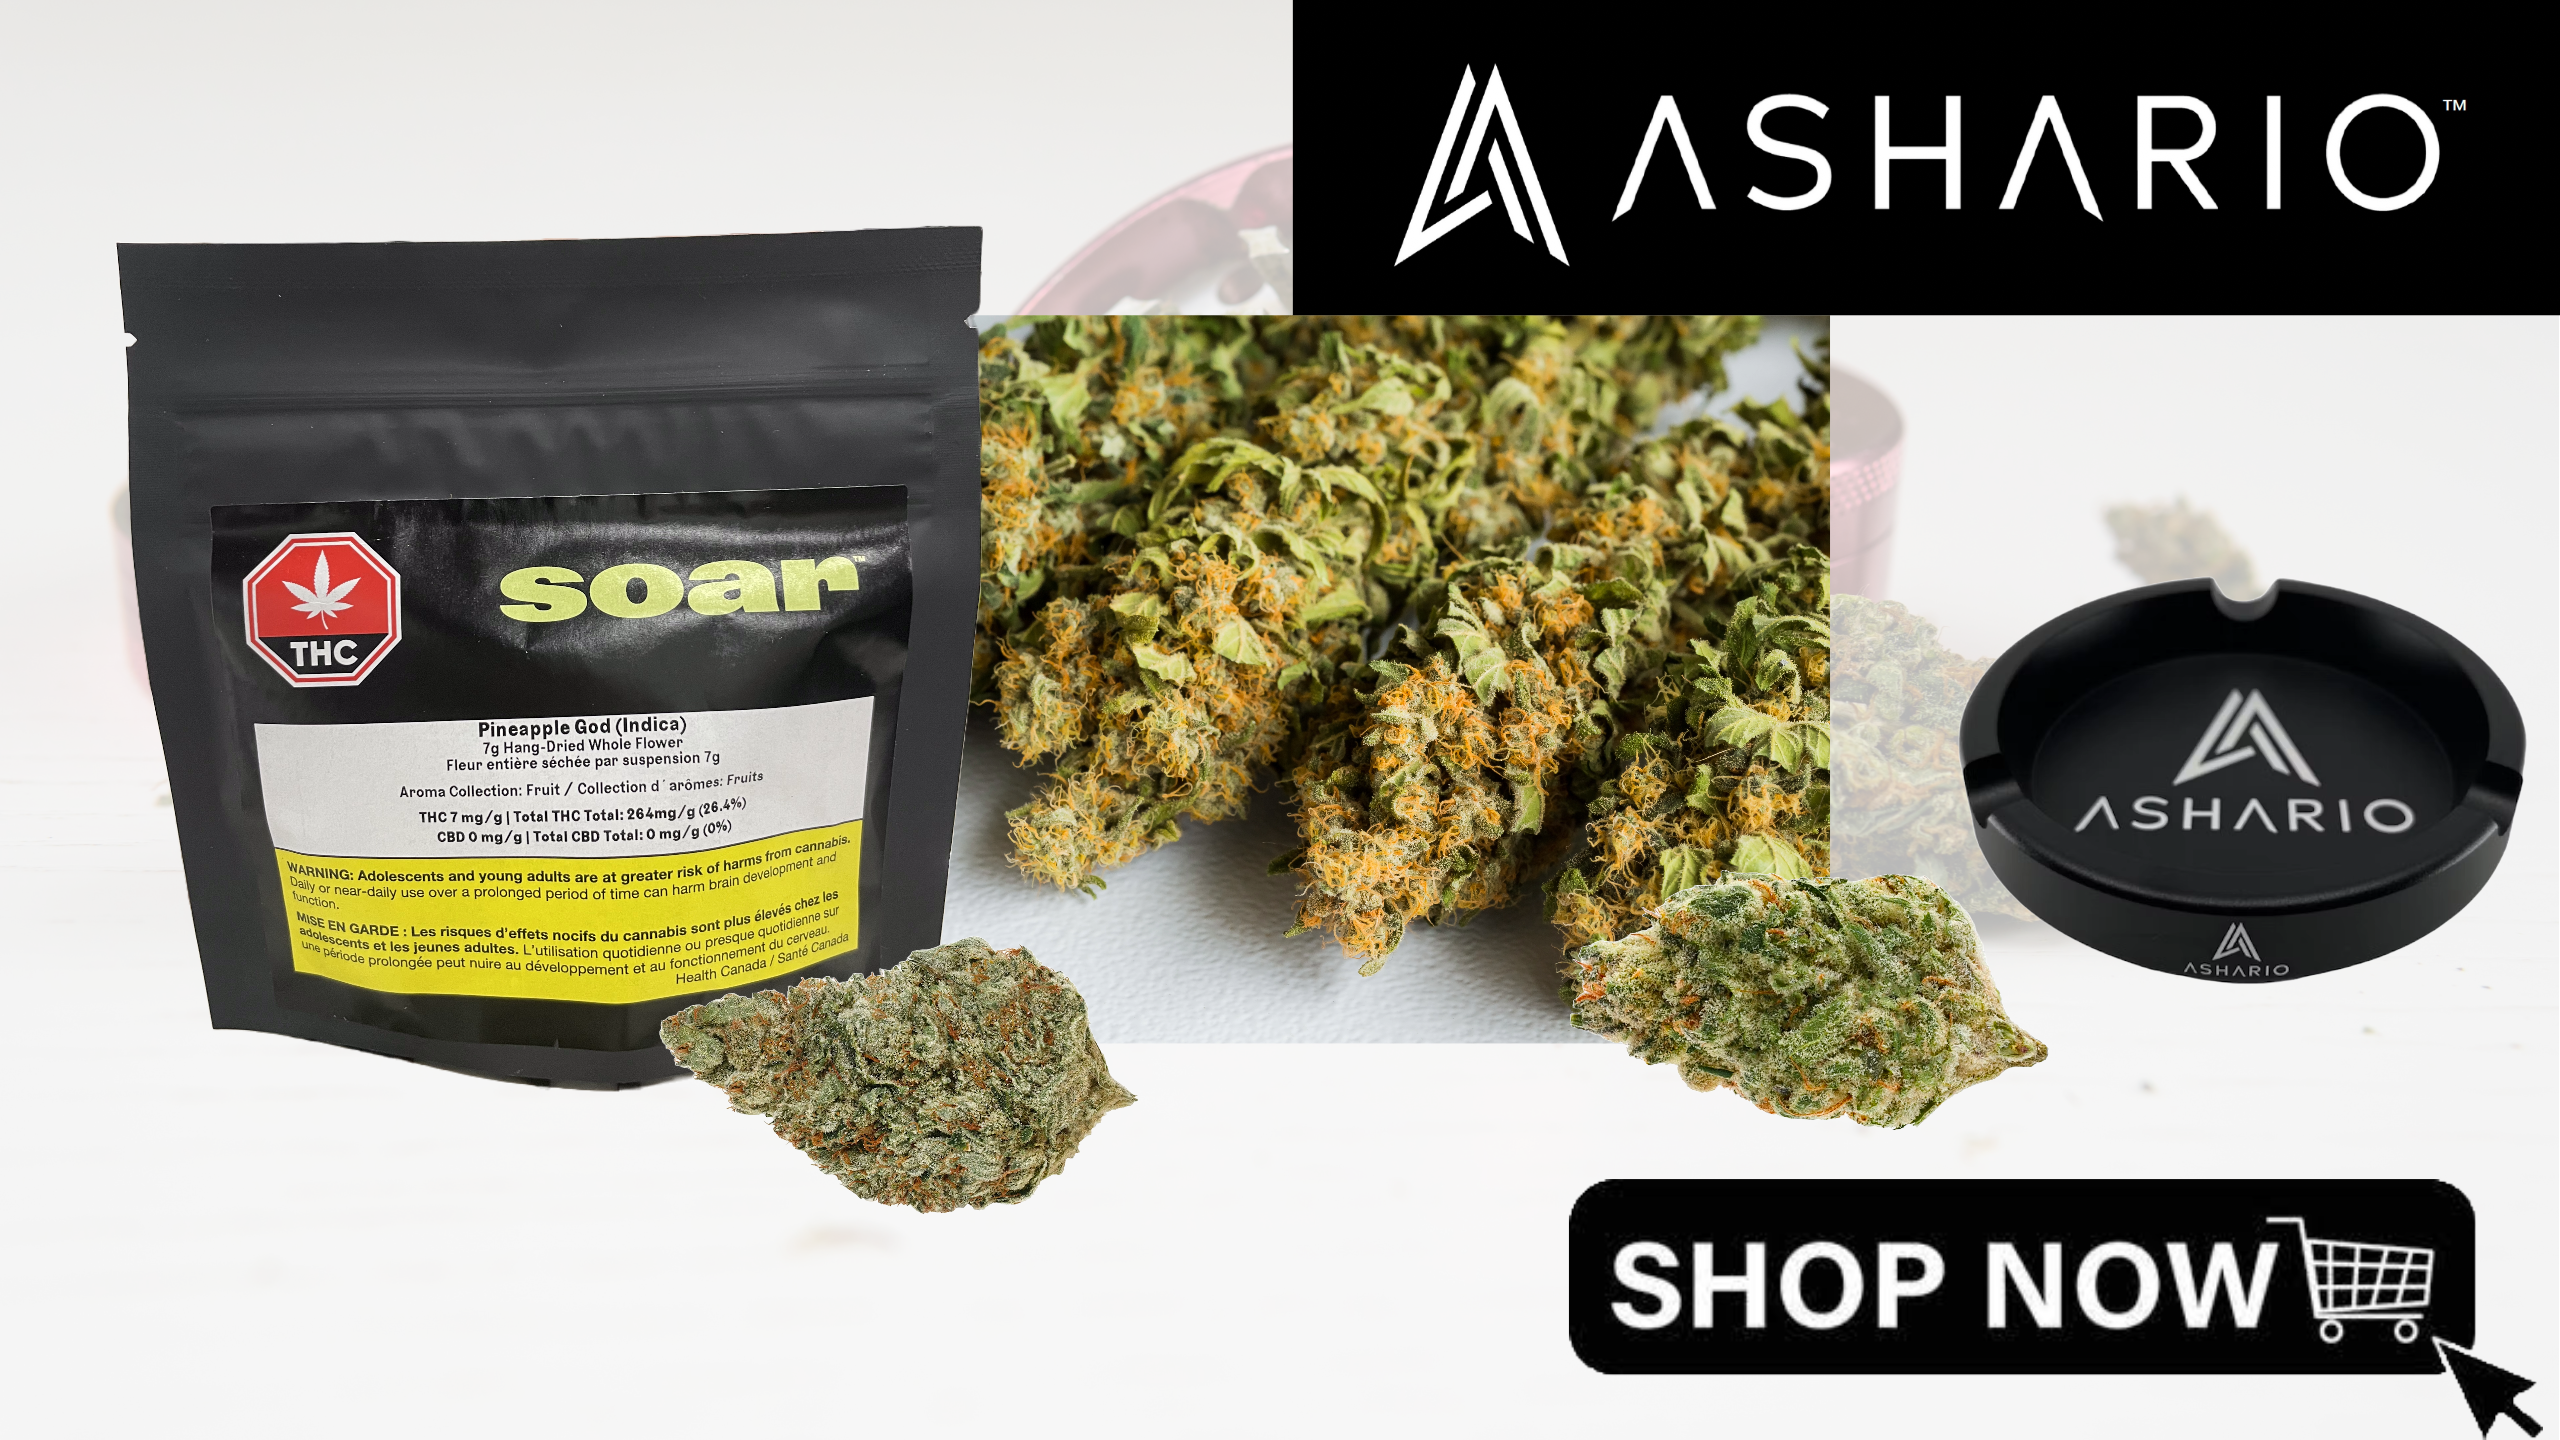 Ascend to new heights of cannabis indulgence with Soar, now available at Ashario Cannabis. Soar offers a premium selection of cannabis flowers meticulously cultivated to perfection.